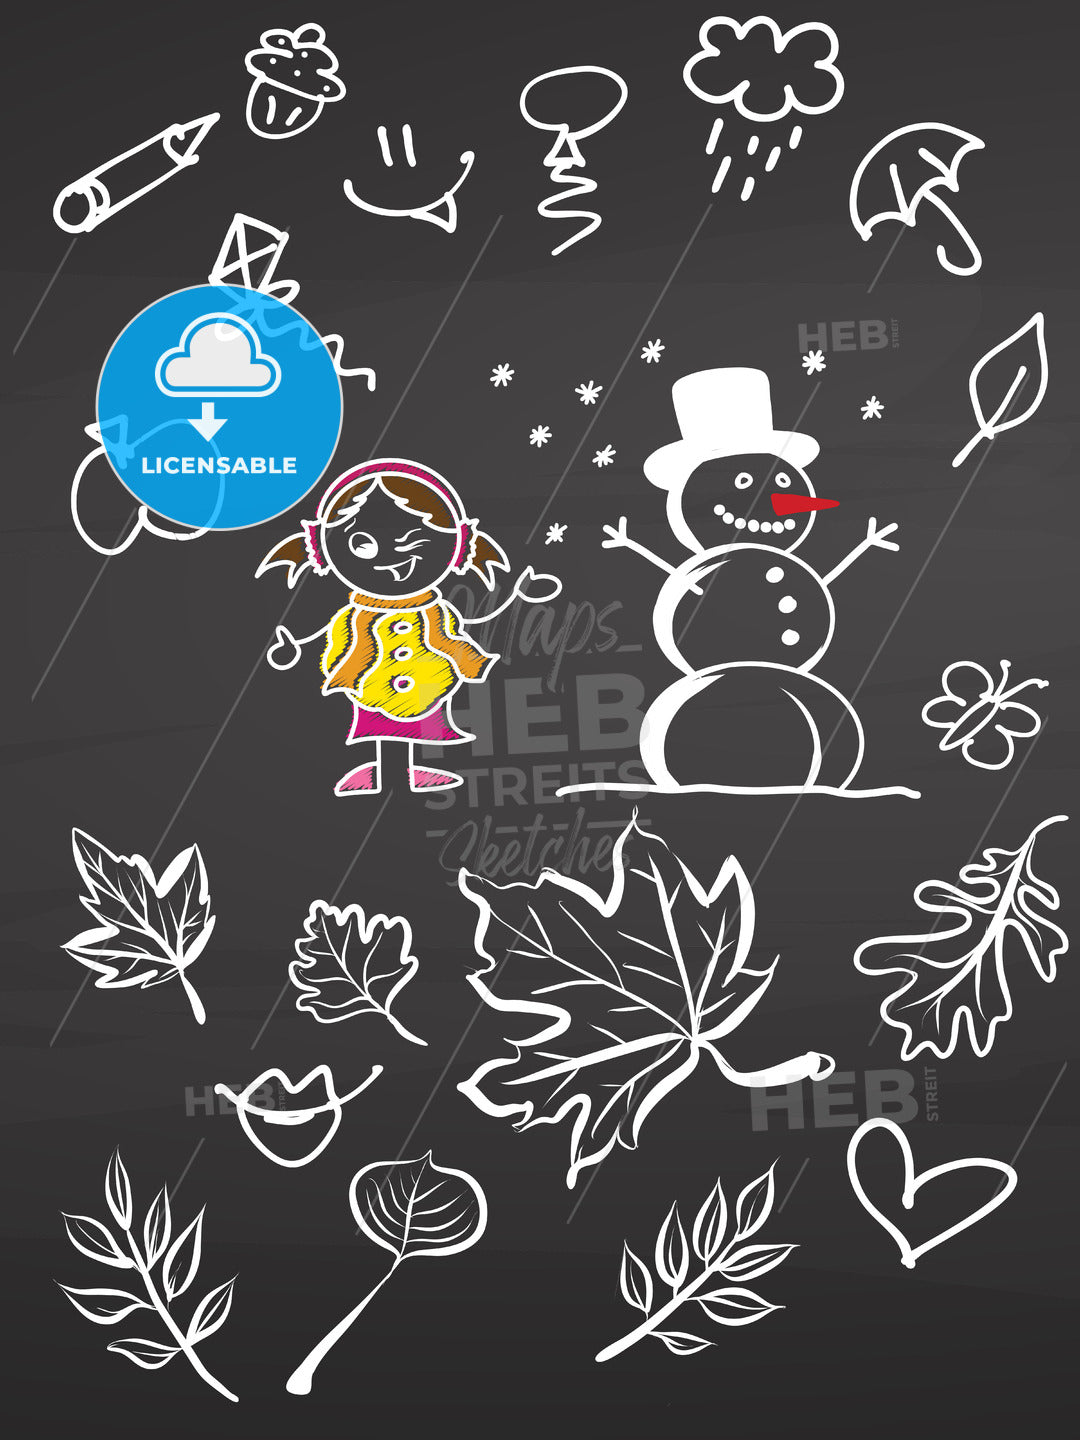 Little Girl and Snowman with doodles on chalkboard – instant download